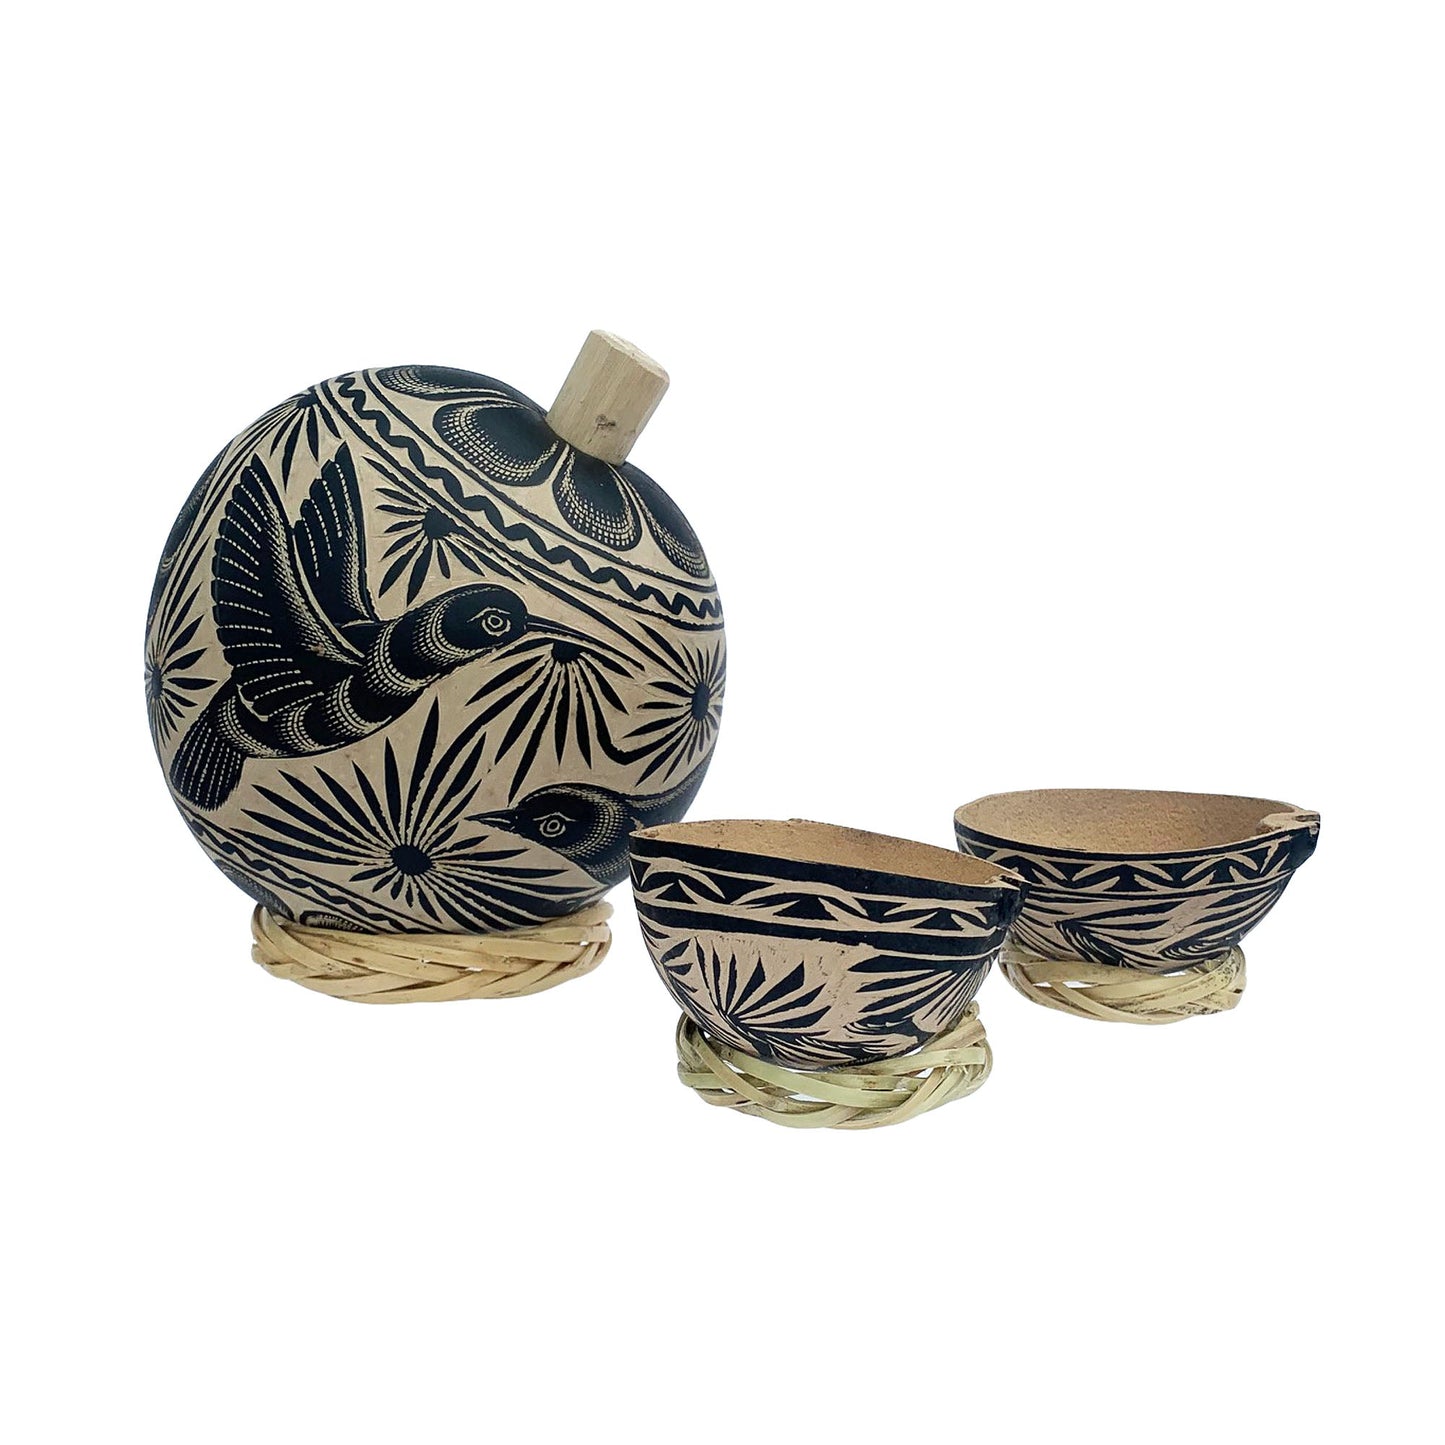 Mezcal or Tequila Jicara Gourd Sipping Set - Available in Black, White and Brown